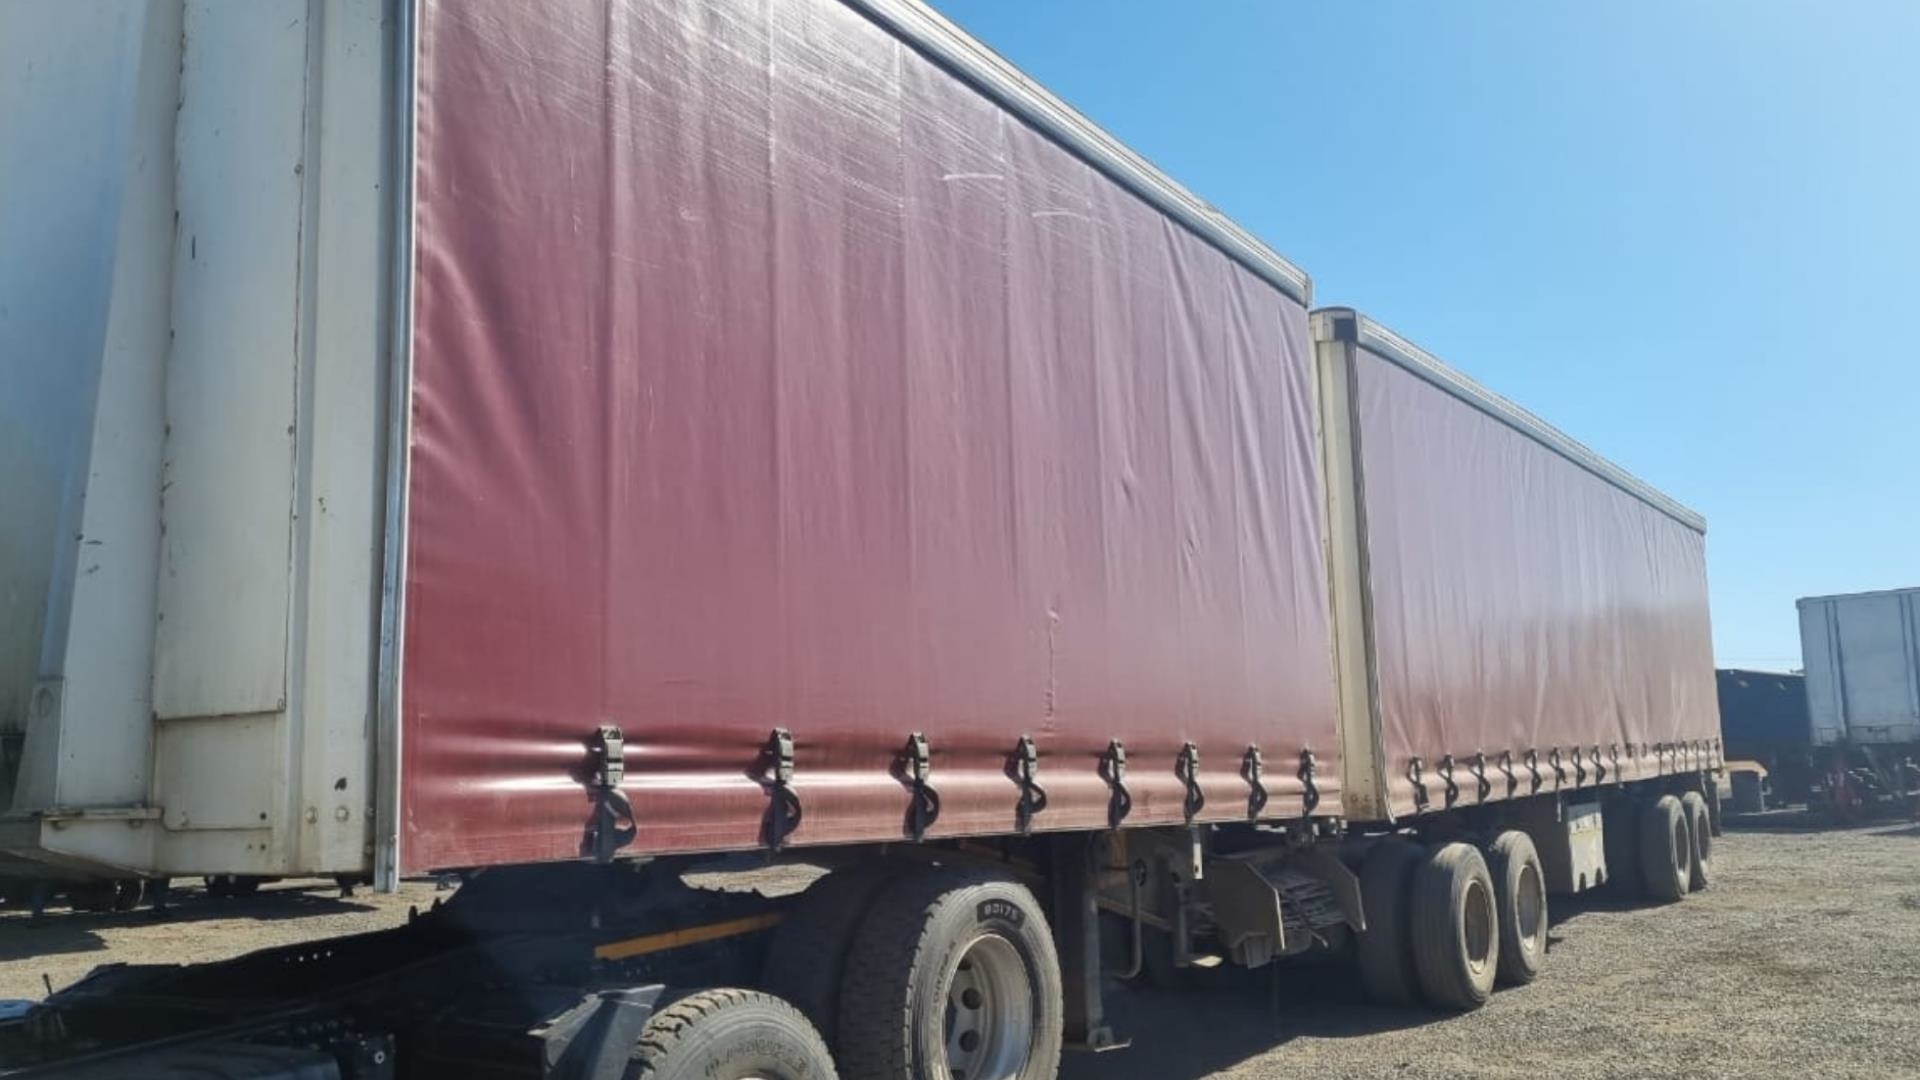 Afrit Trailers 2008 Afrit Tautliner 2008 for sale by Truck and Plant Connection | Truck & Trailer Marketplaces